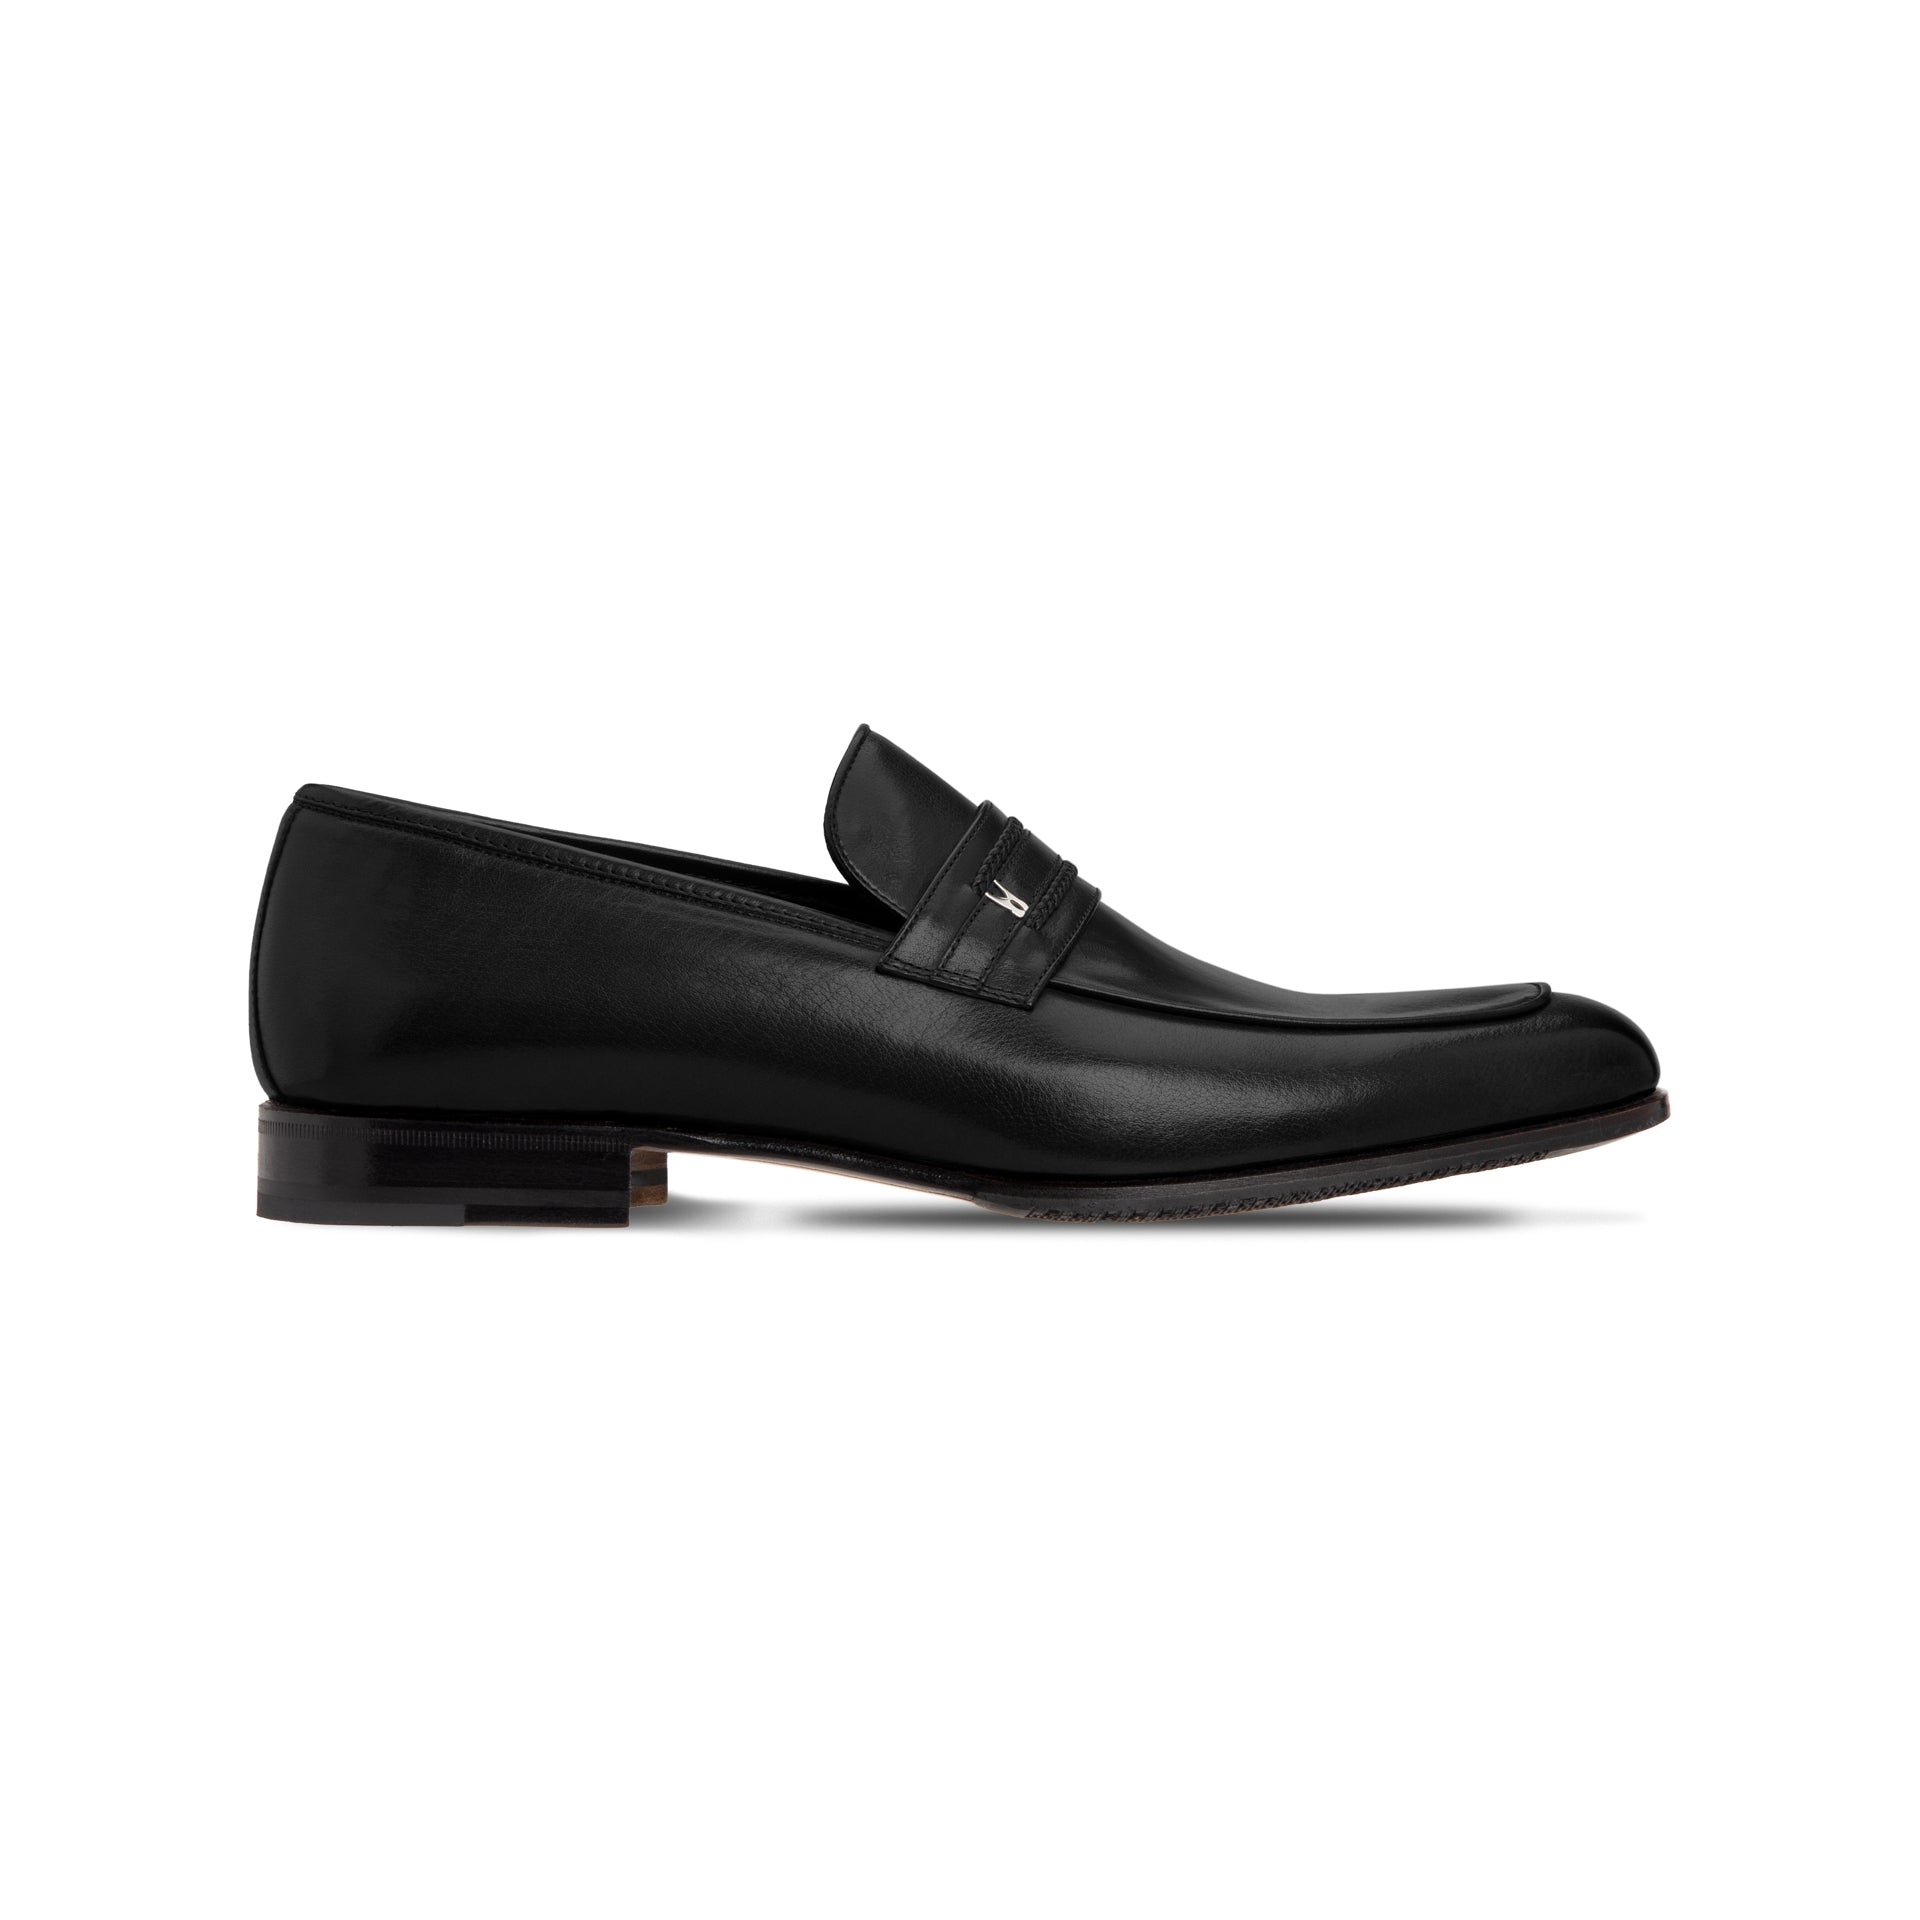 where to buy loafers near me